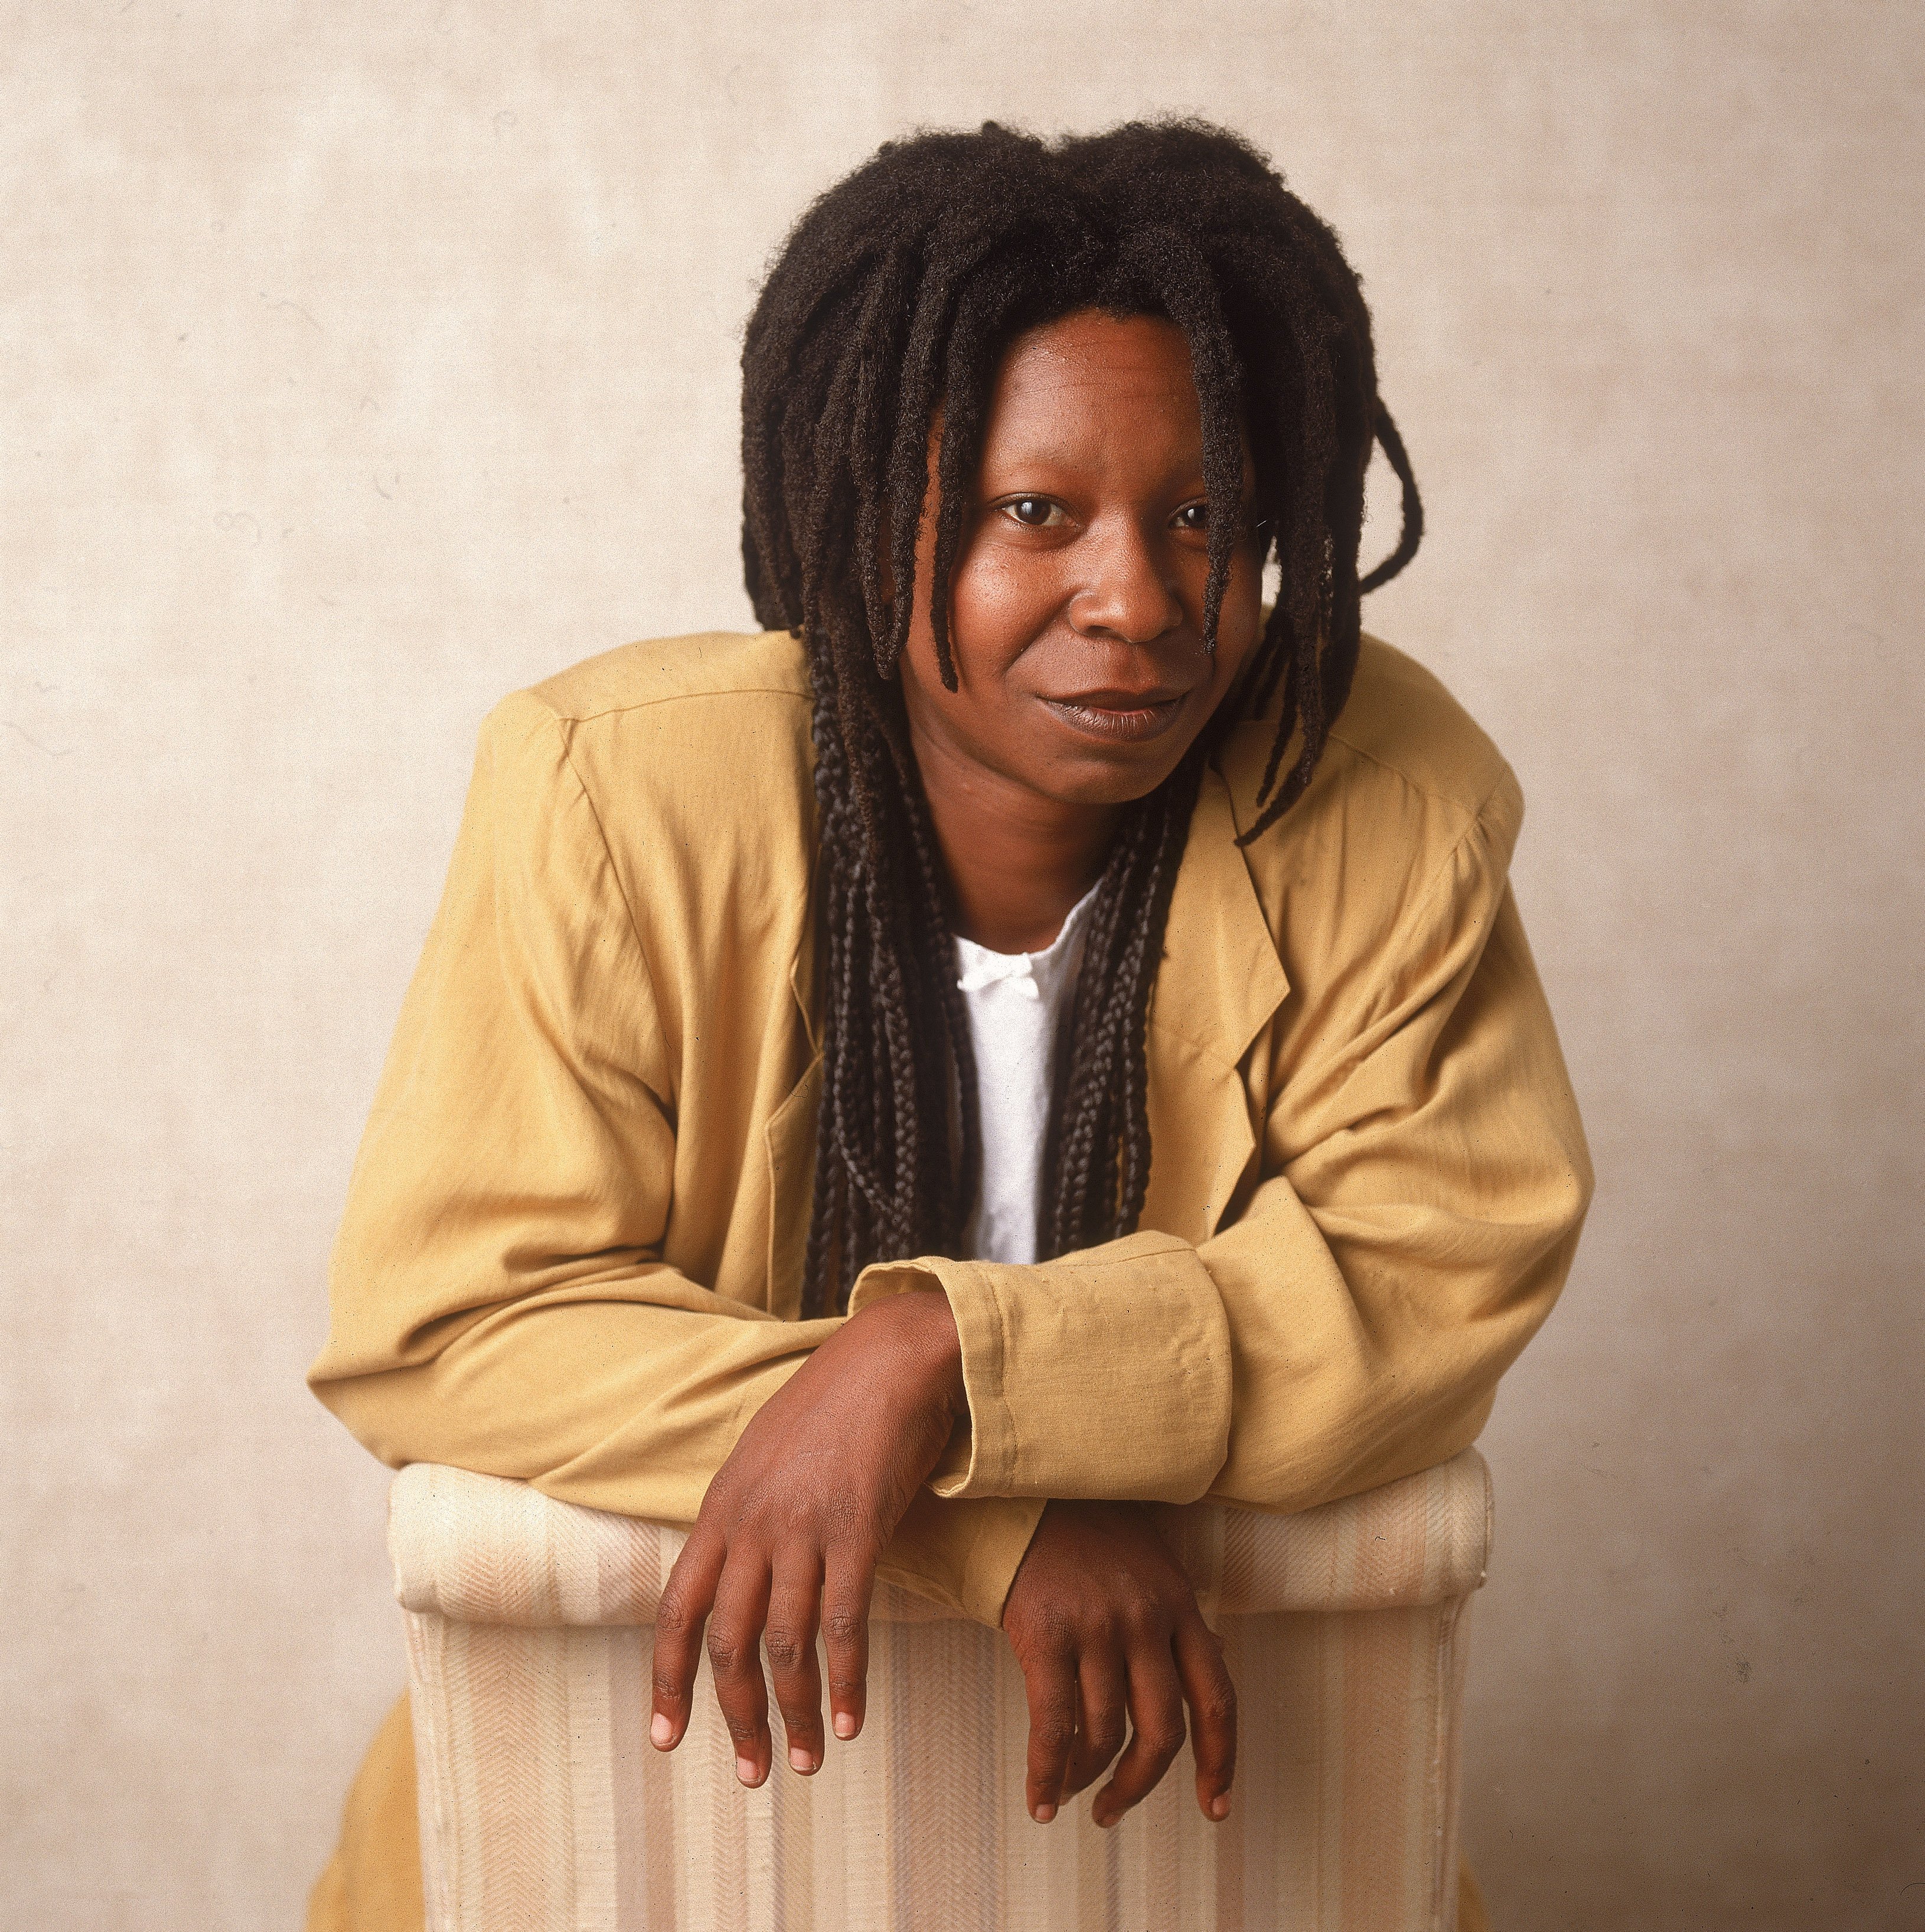 Studio portrait of American actor and comedian Whoopi Goldberg leaning on a chair, 1988. | Source: Getty Images